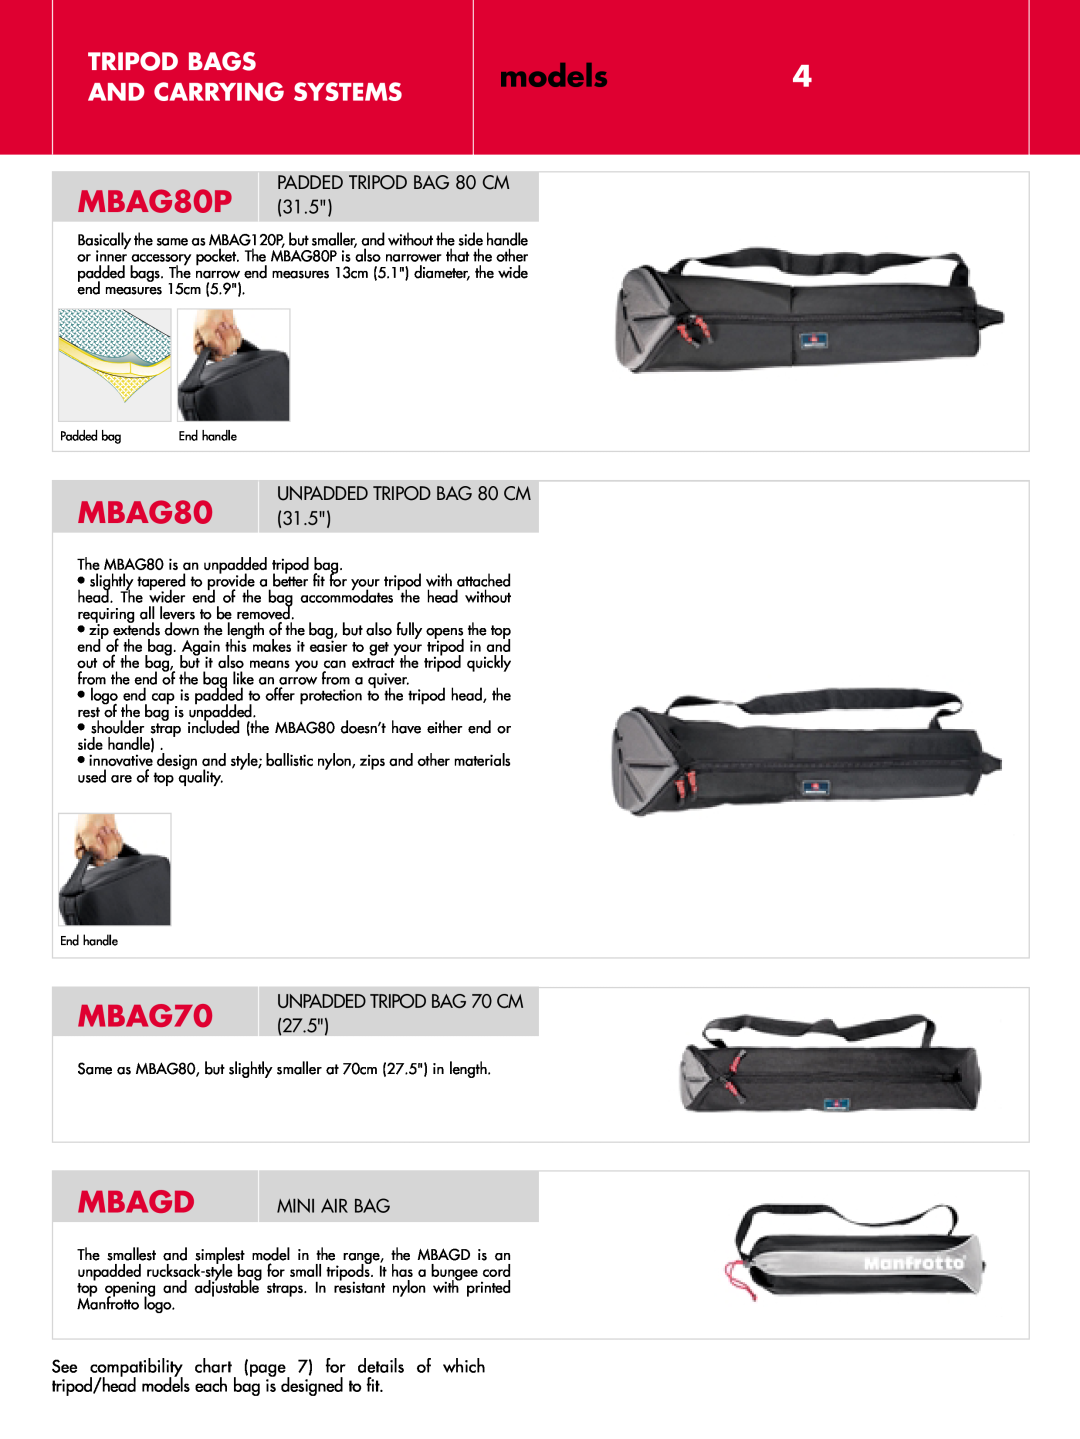 Manfrotto MBAG100P, MBAGD manual models4, MBAG80P, MBAG70, Mbagd, Tripod Bags And Carrying Systems, PADDED TRIPOD BAG 80 CM 